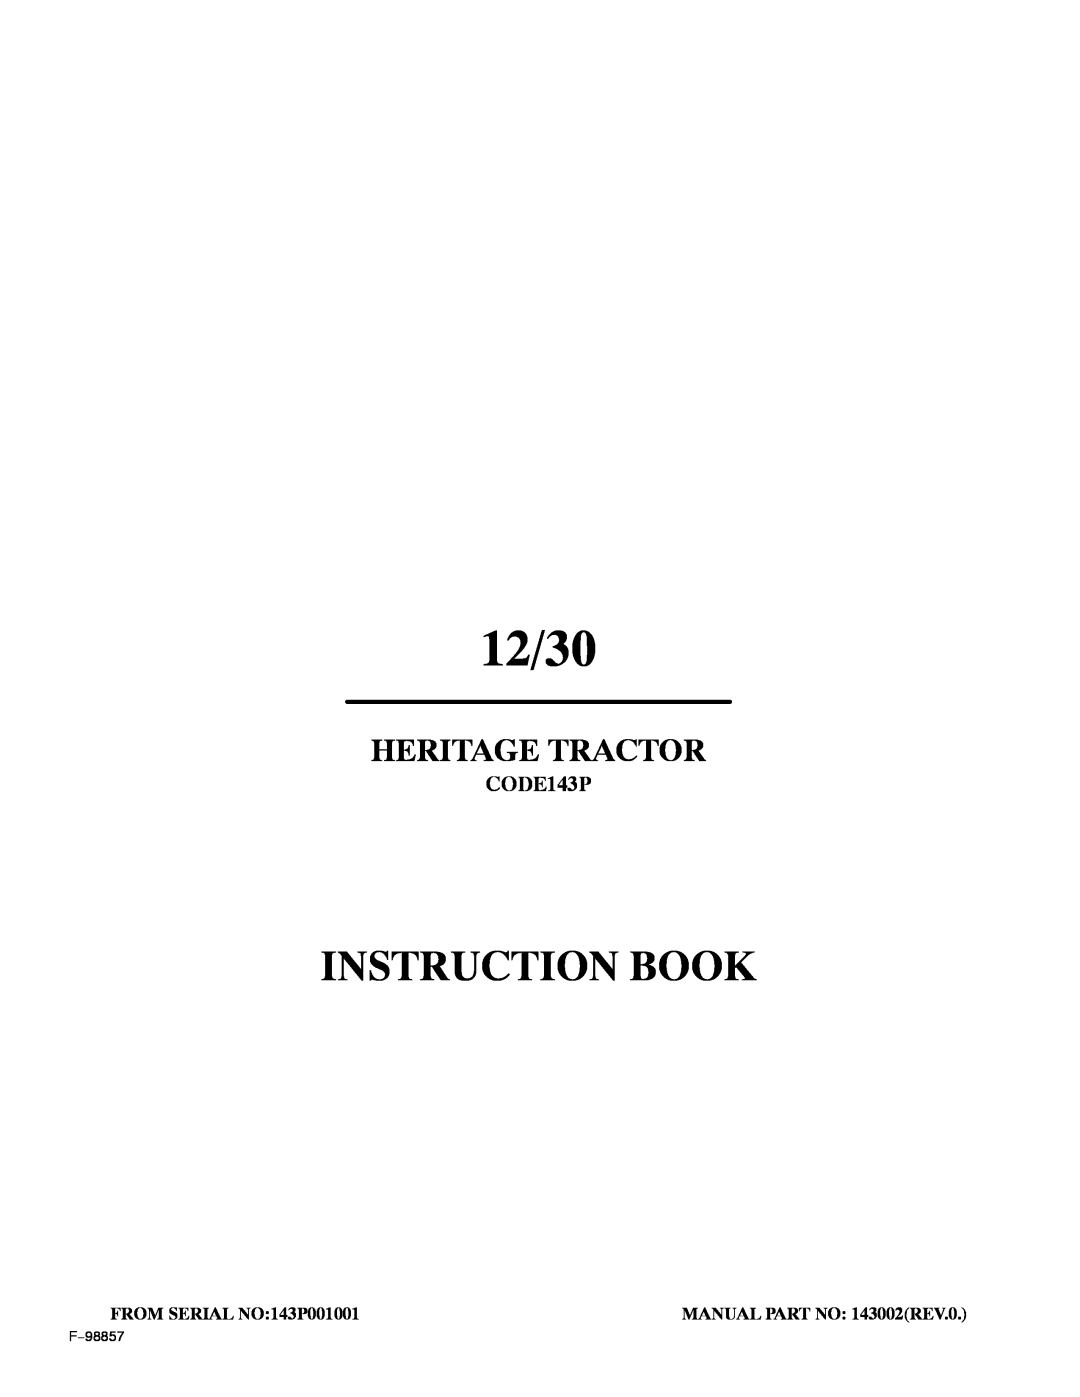 Hayter Mowers 30-Dec manual 12/30, Instruction Book, Heritage Tractor, CODE143P, FROM SERIAL NO143P001001 